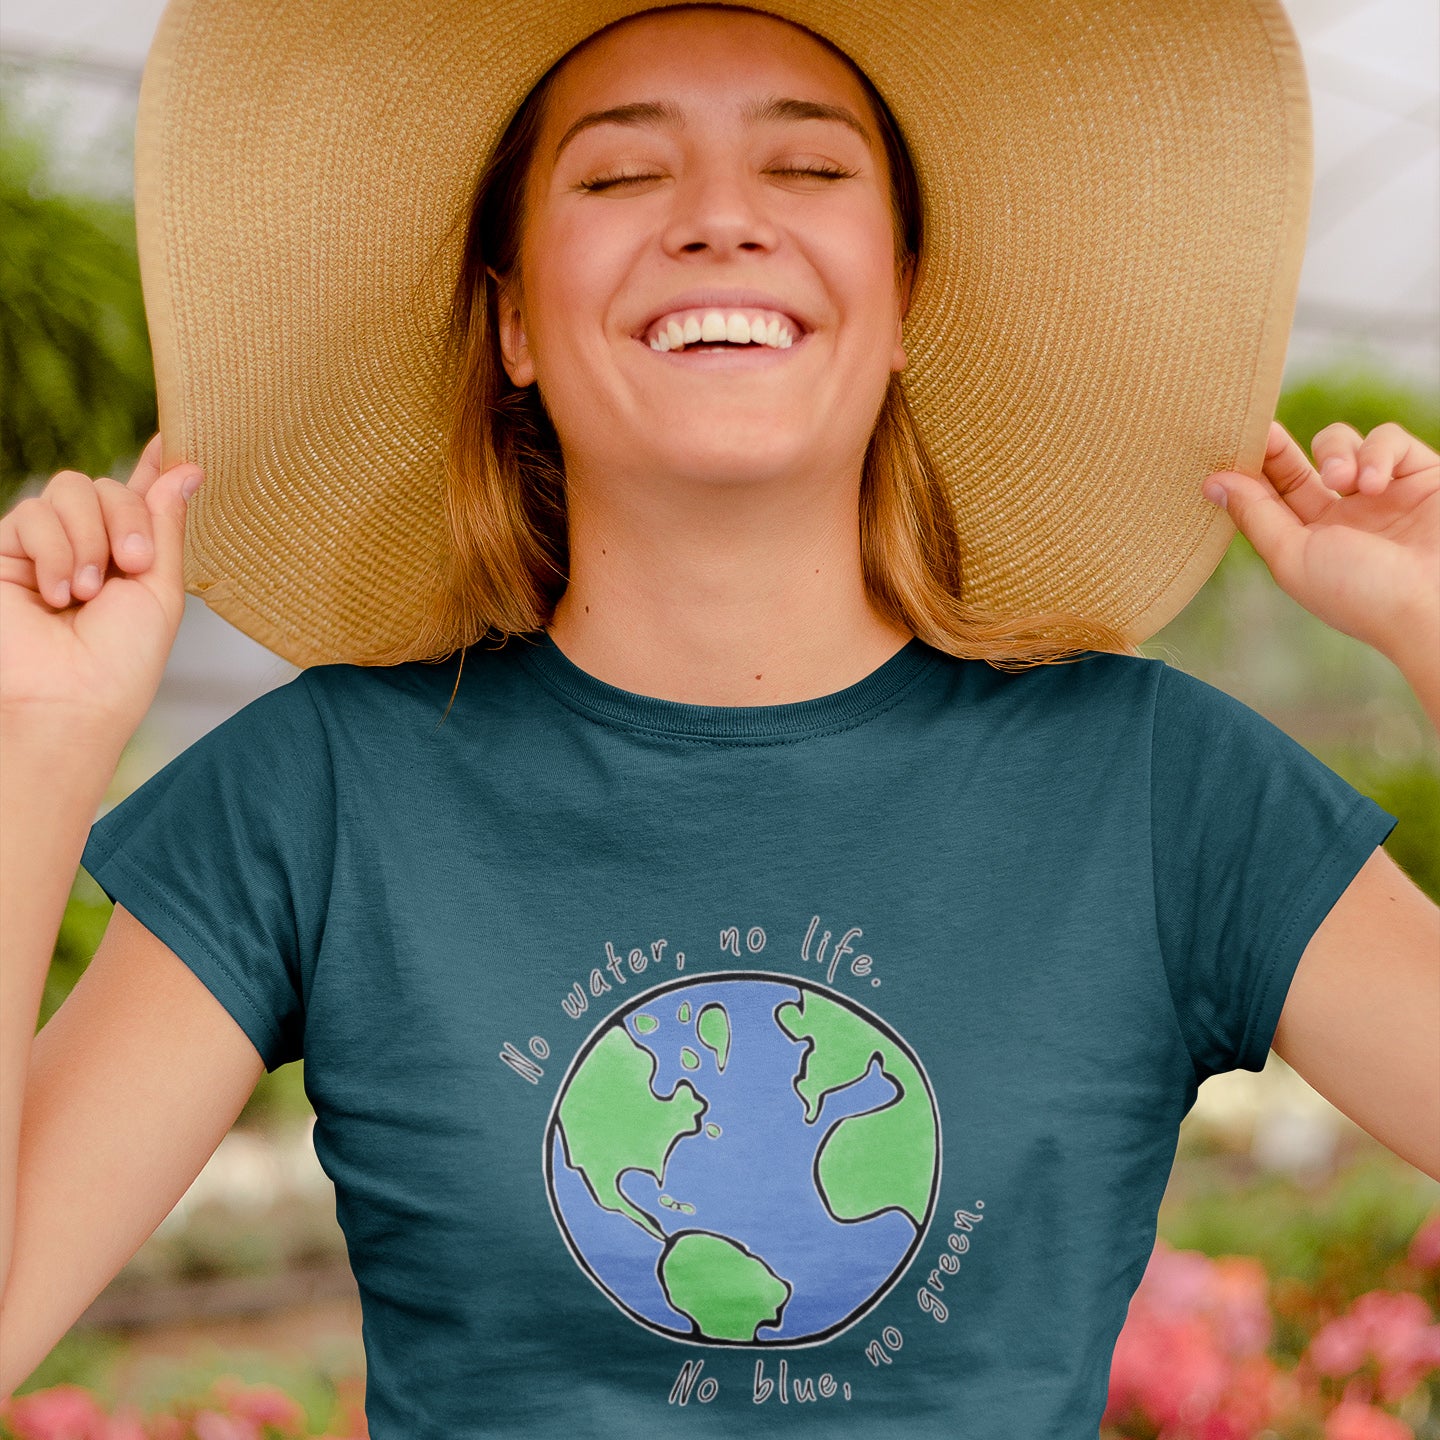 girl in greenhouse with flowers and sunhat wearing sharonkornman "No Blue No Green" tshirt - 10% of profits give back to non-profit organizations - ethically and sustainably made clothing